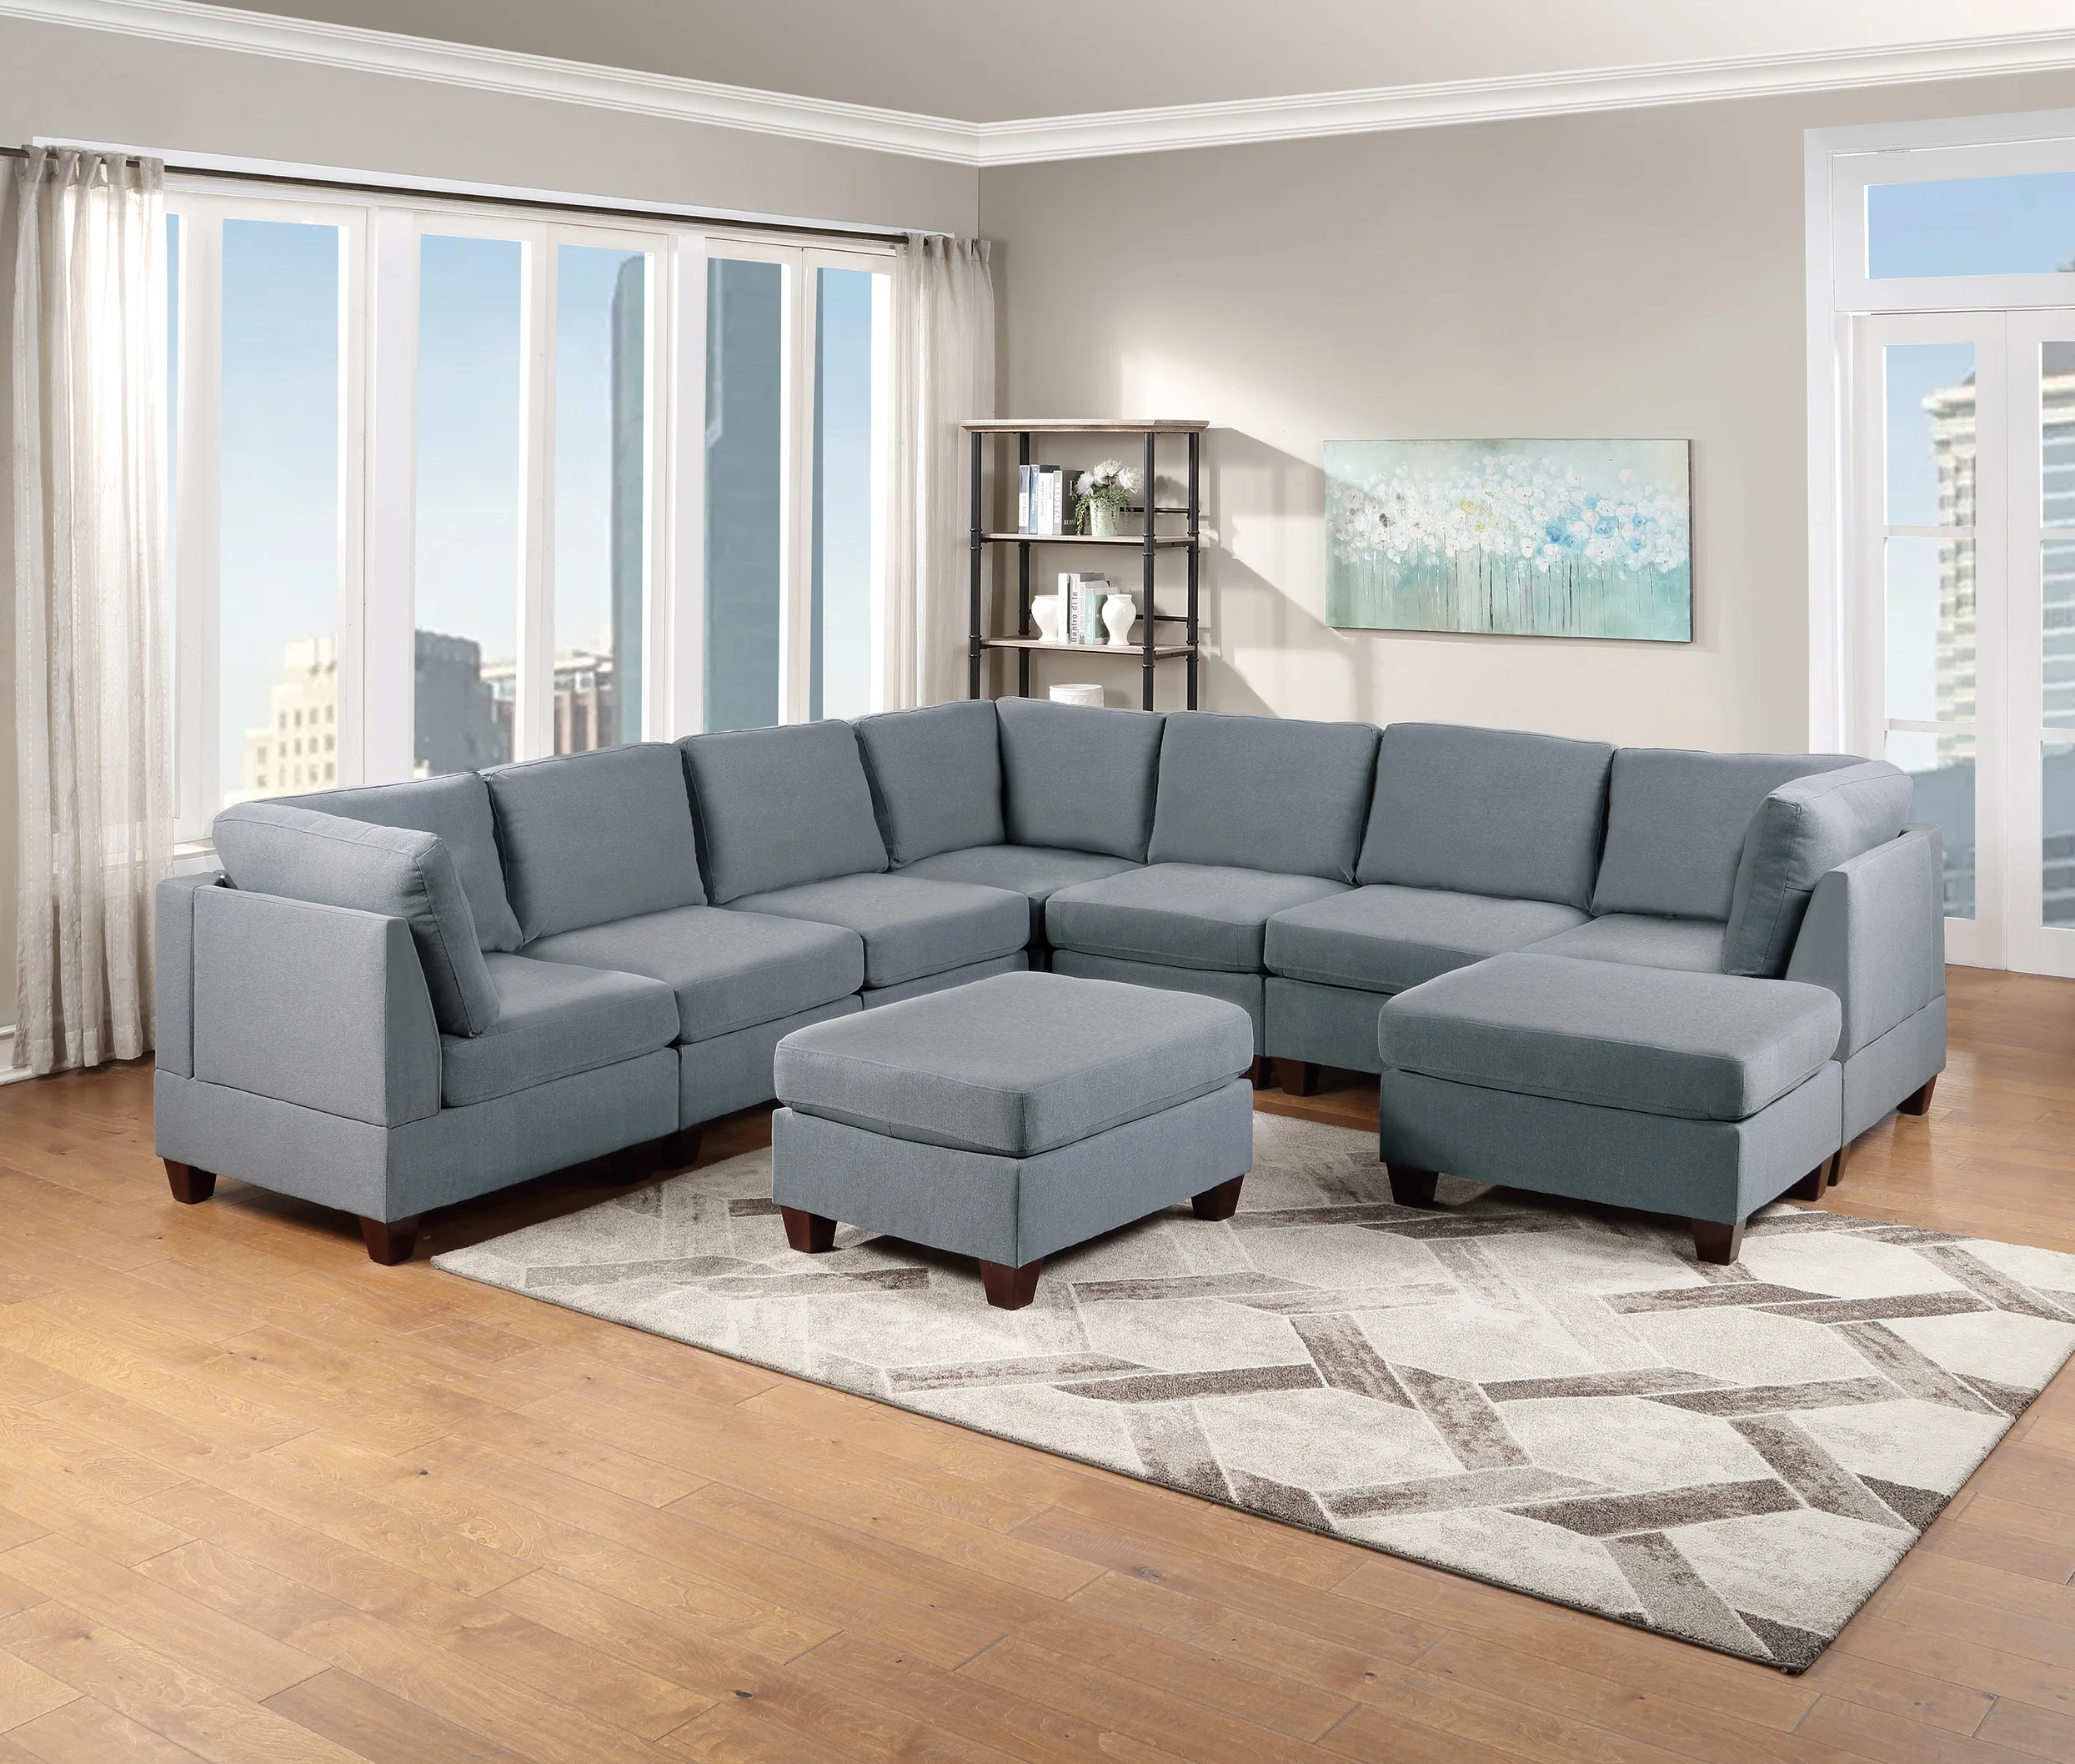 

Modular Sectional 9pc Set Living Room Furniture Corner Sectional Couch Grey Linen Like Fabric 3x Corner Wedge 4x Armless Chairs